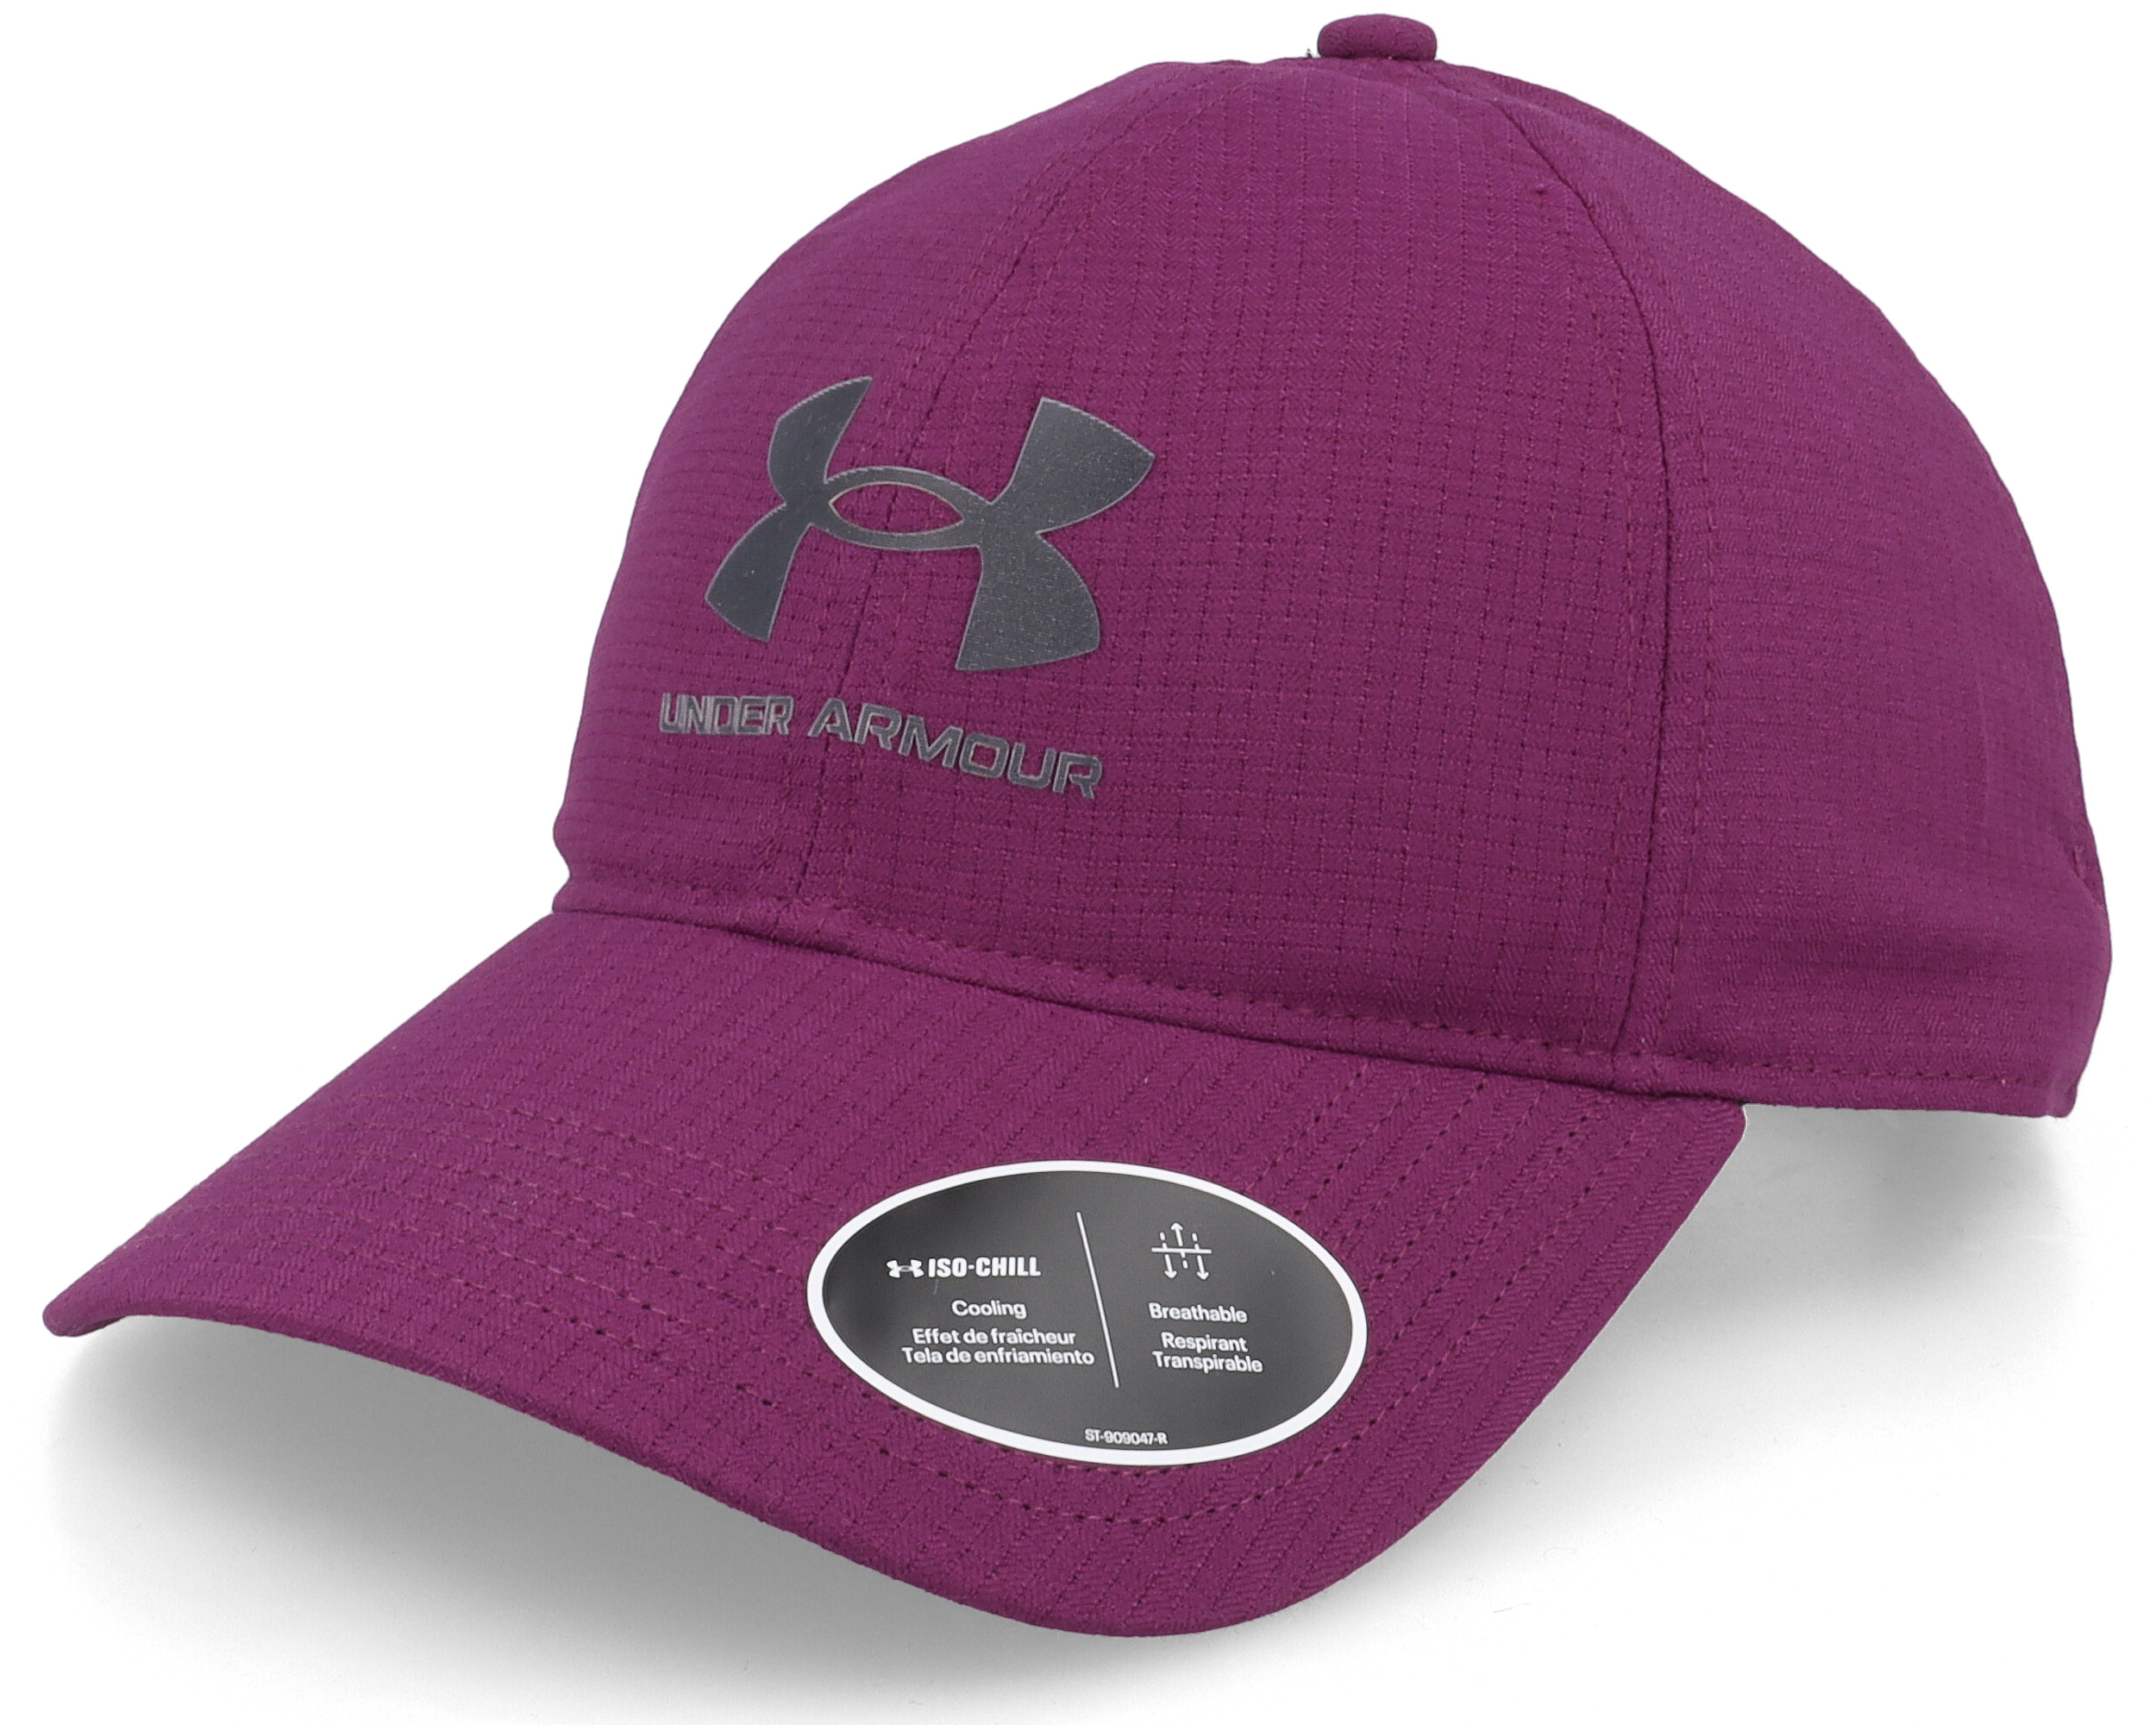 Isochill Armourvent Rivalry/Black Dad Cap - Under Armour